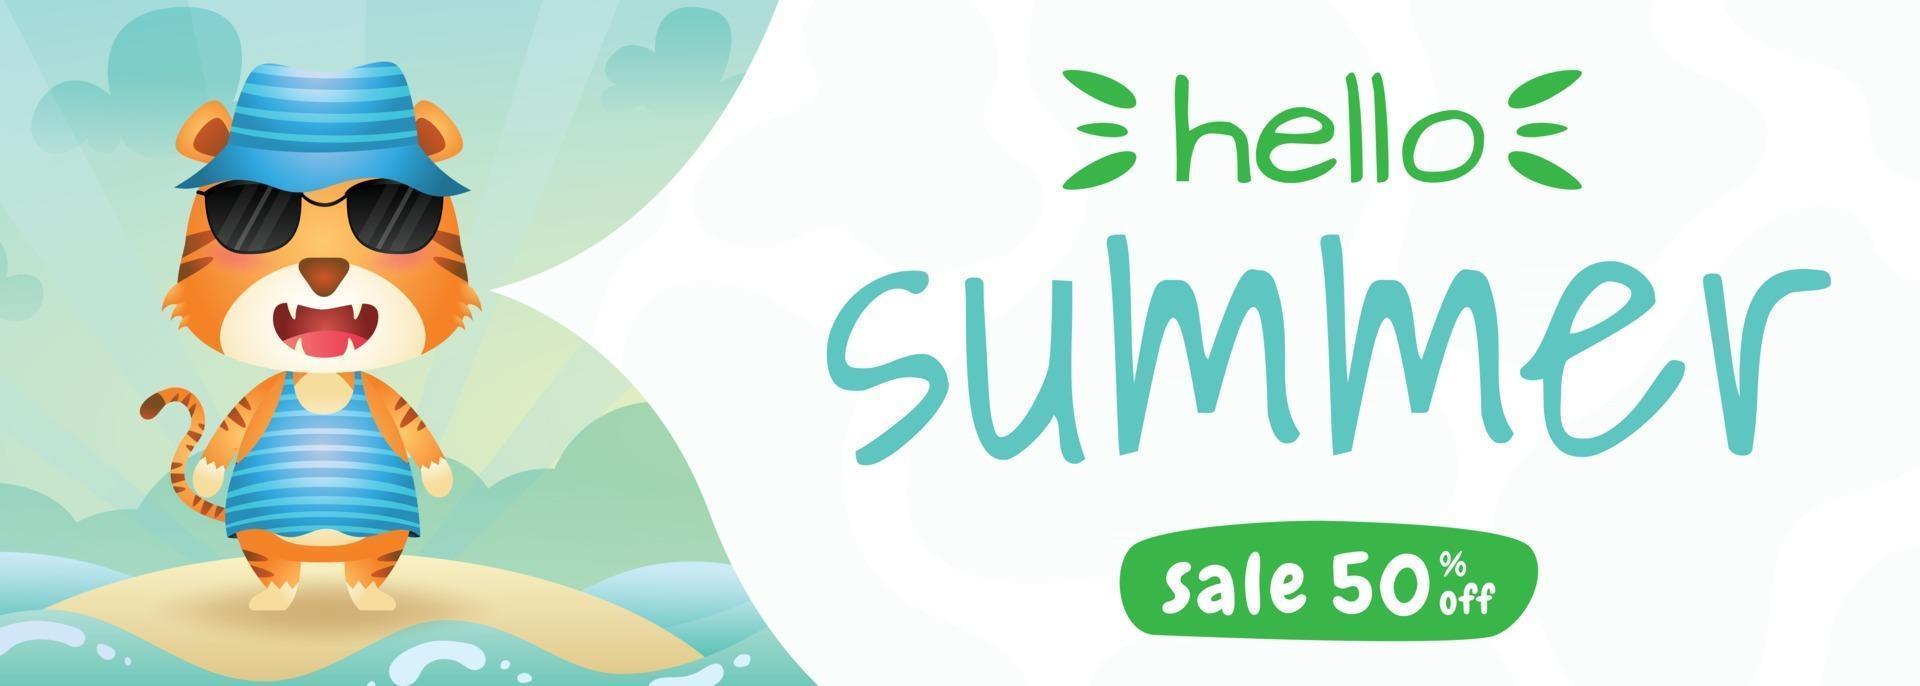 summer sale banner with a cute tiger using summer costume vector